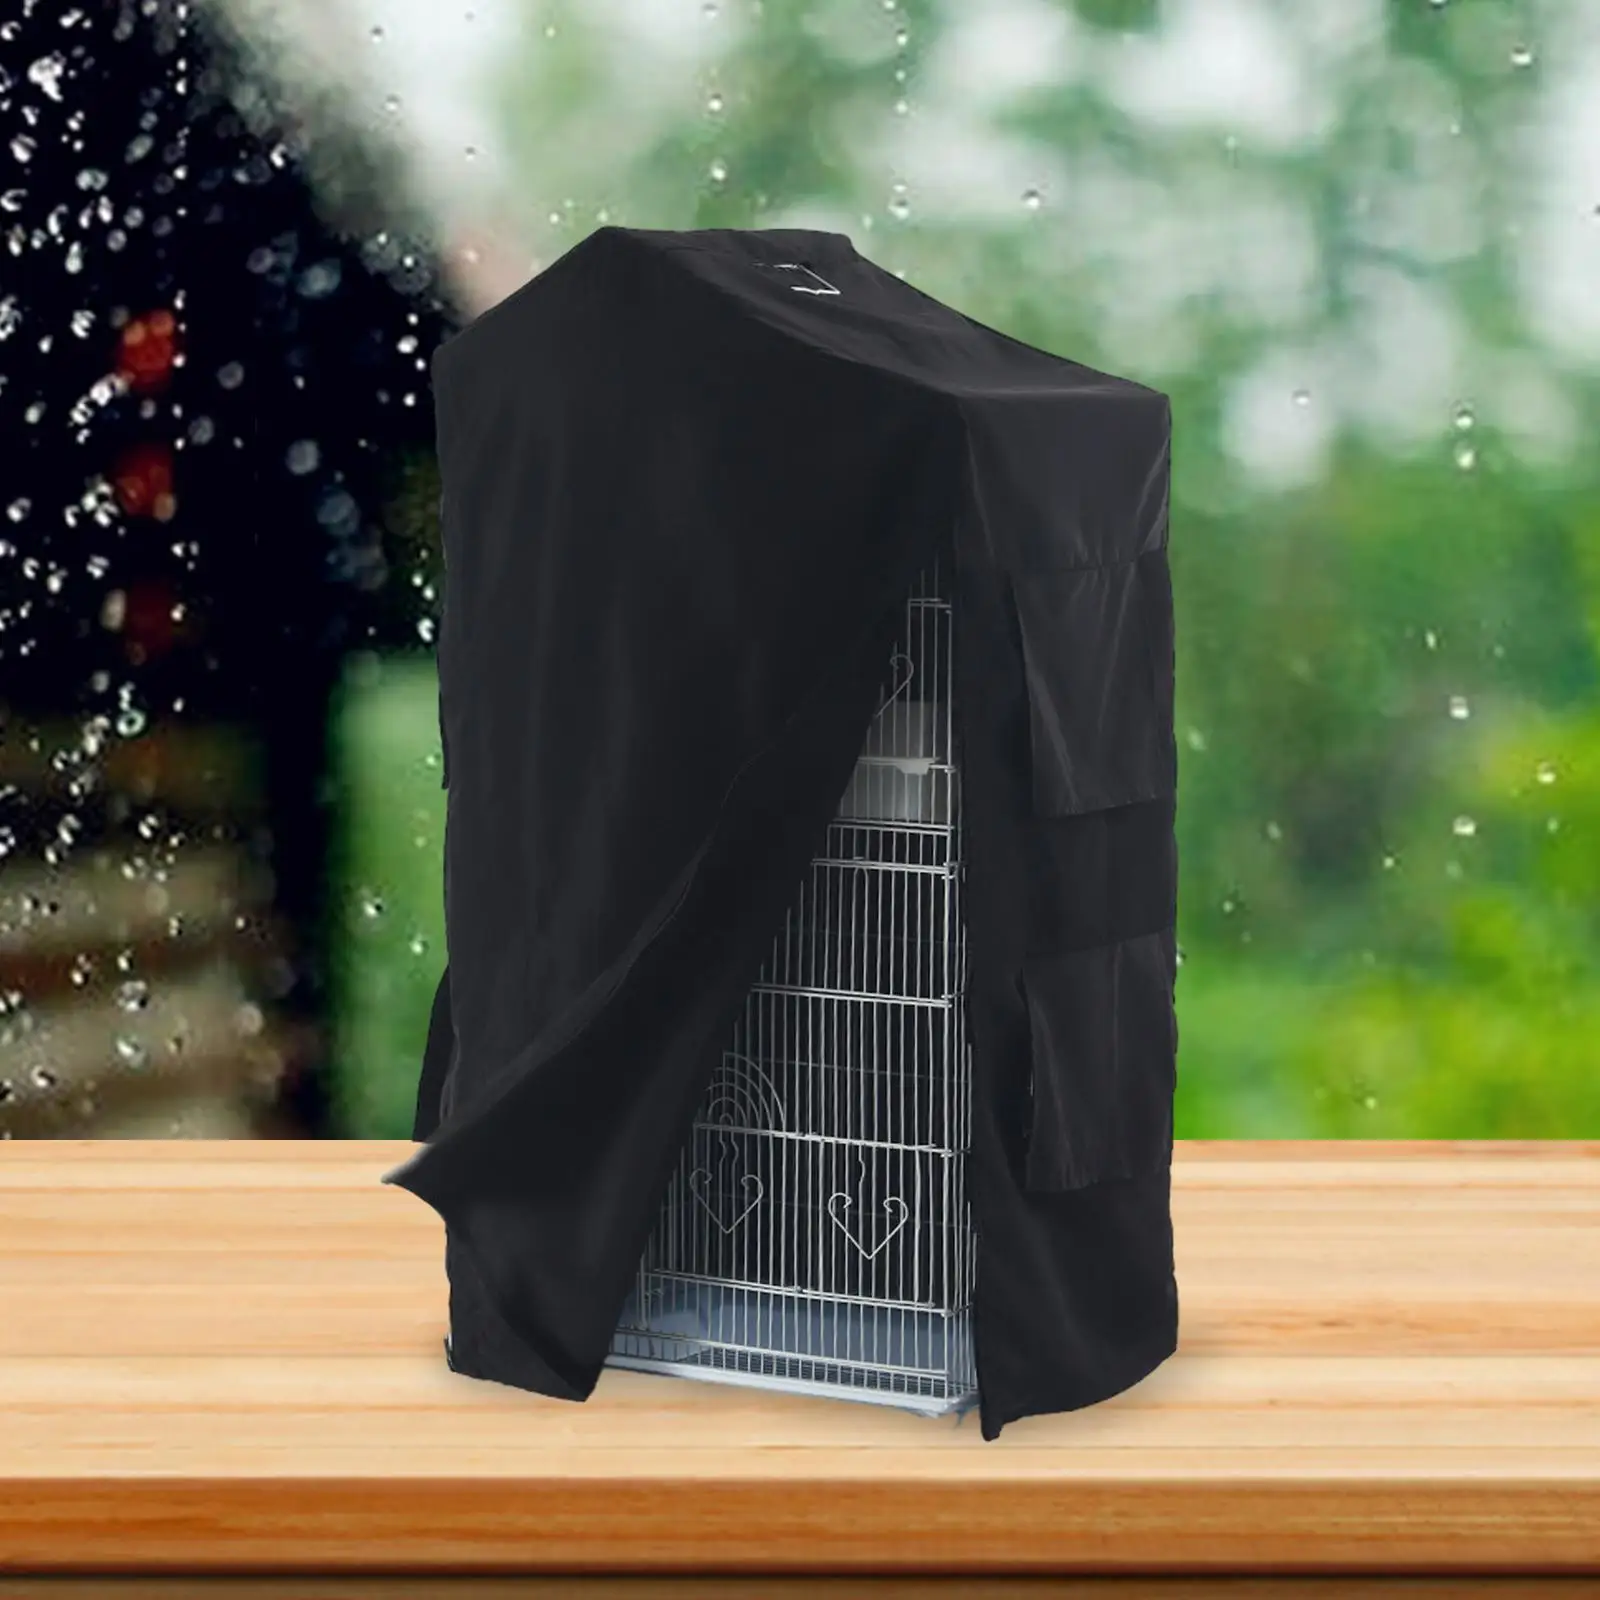 Bird Cage Cover Waterproof Blackout Cover for Lovebirds Parrot Accessories